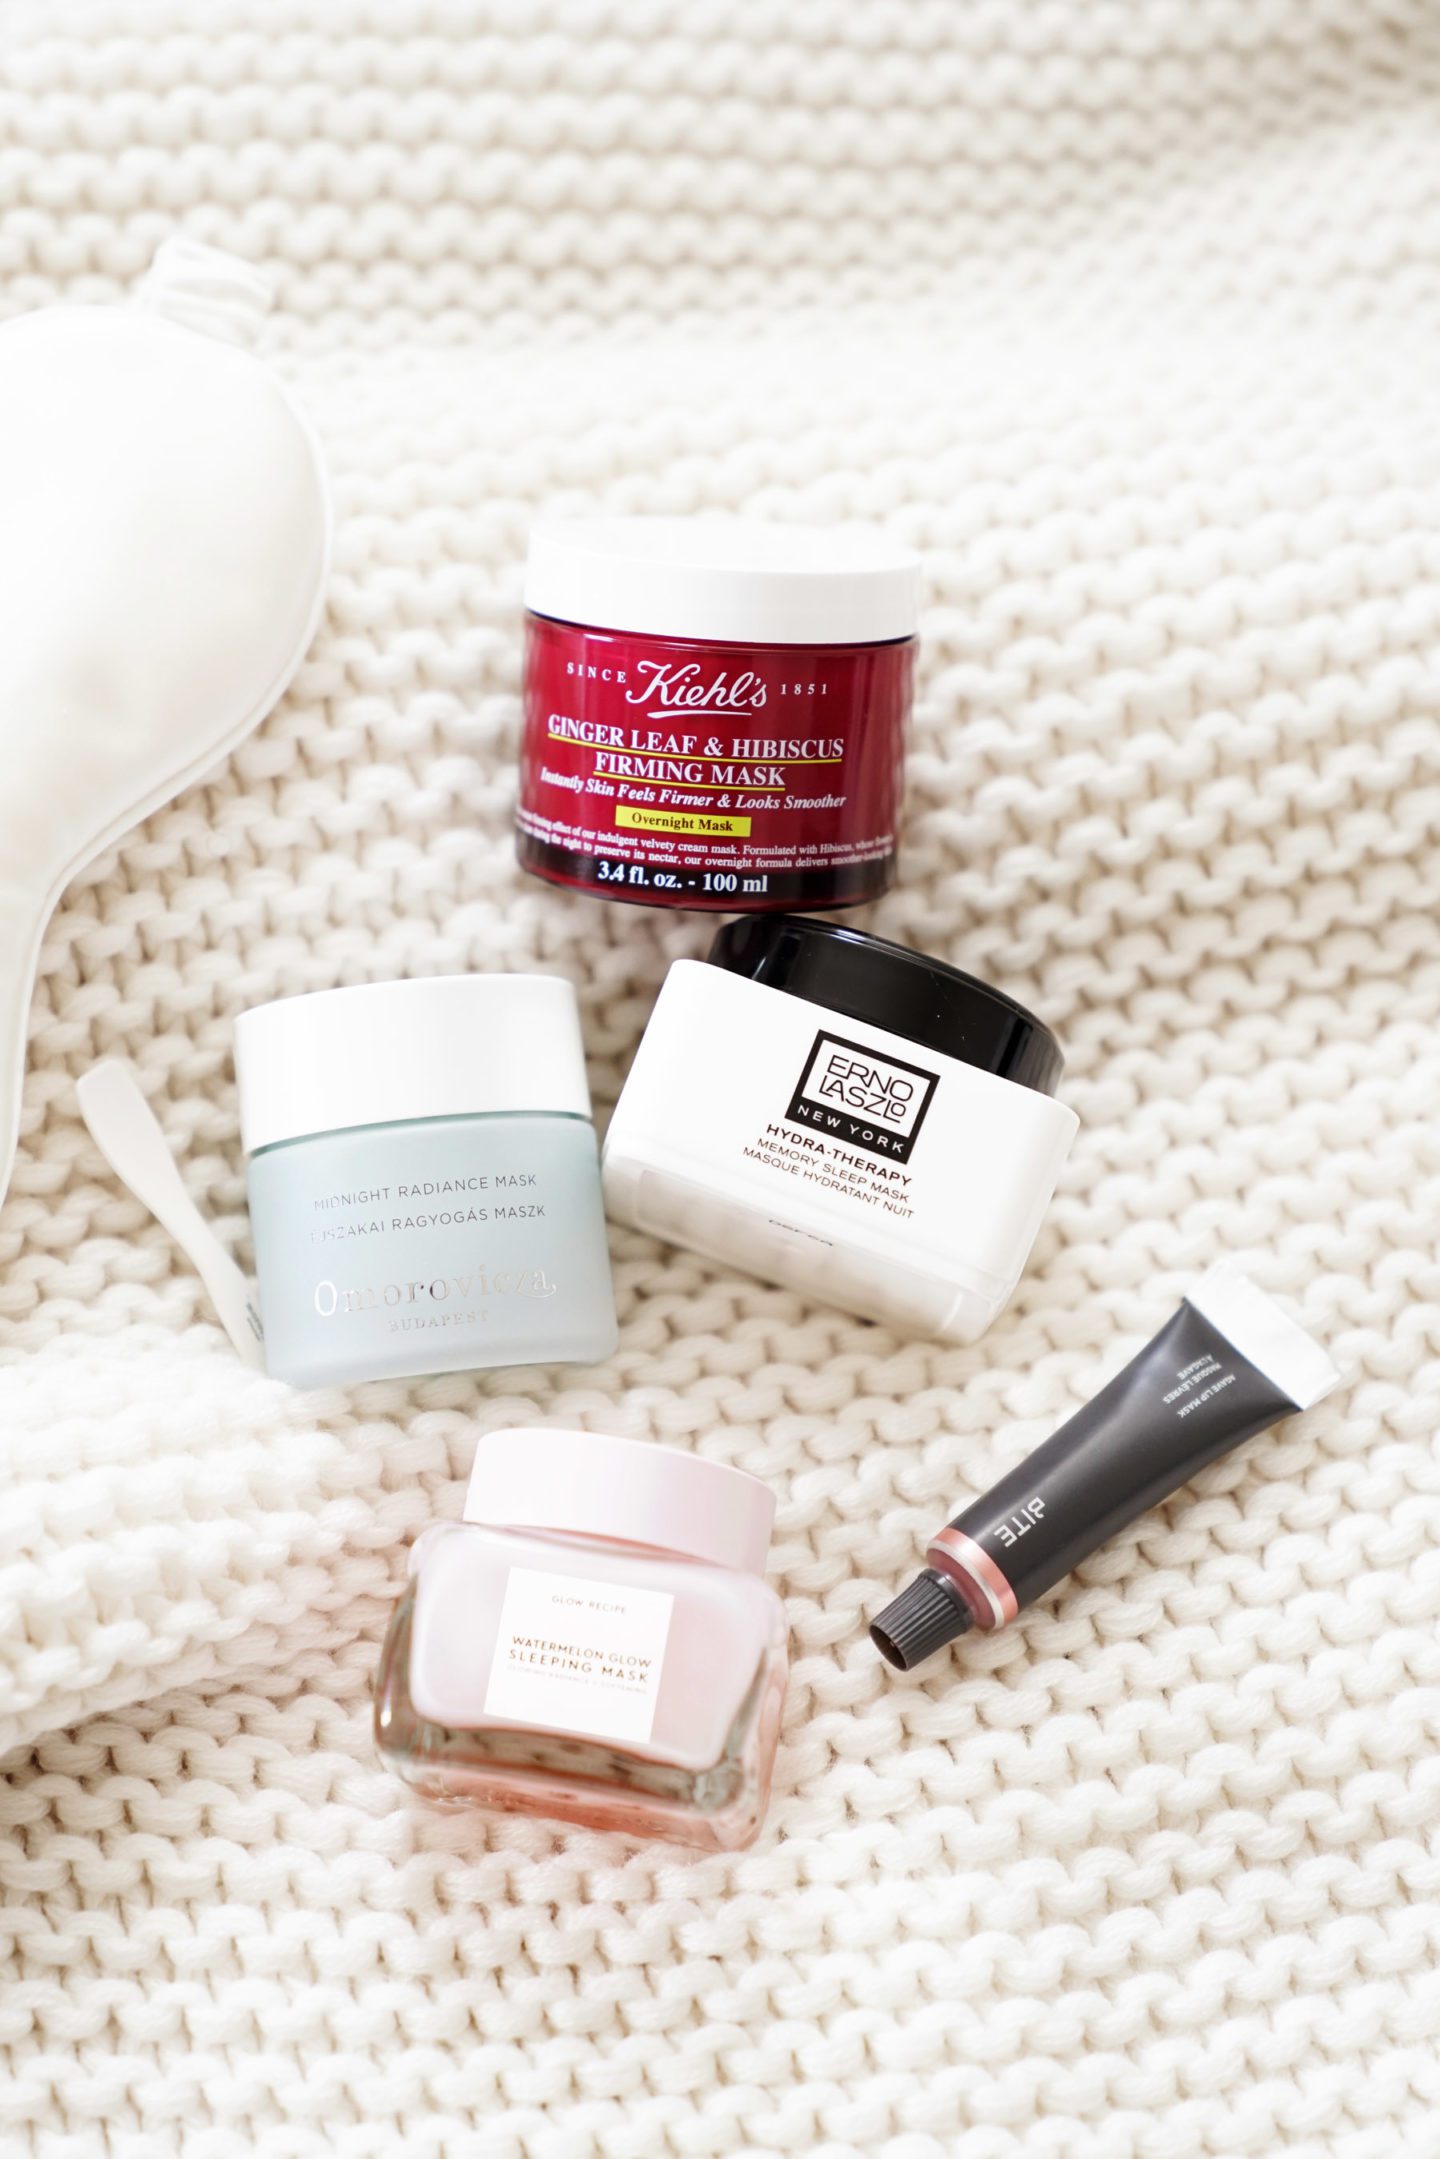 Best Sleep Masks Kiehl's Ginger Leaf and Hibiscus Firming Mask, Erno Laszlo Hydra-Therapy Memory Sleep Mask, Omorovicza Midnight Radiance Mask, Glow Recipe Watermelon Sleeping Mask, Bite Beauty Agave Lip Mask